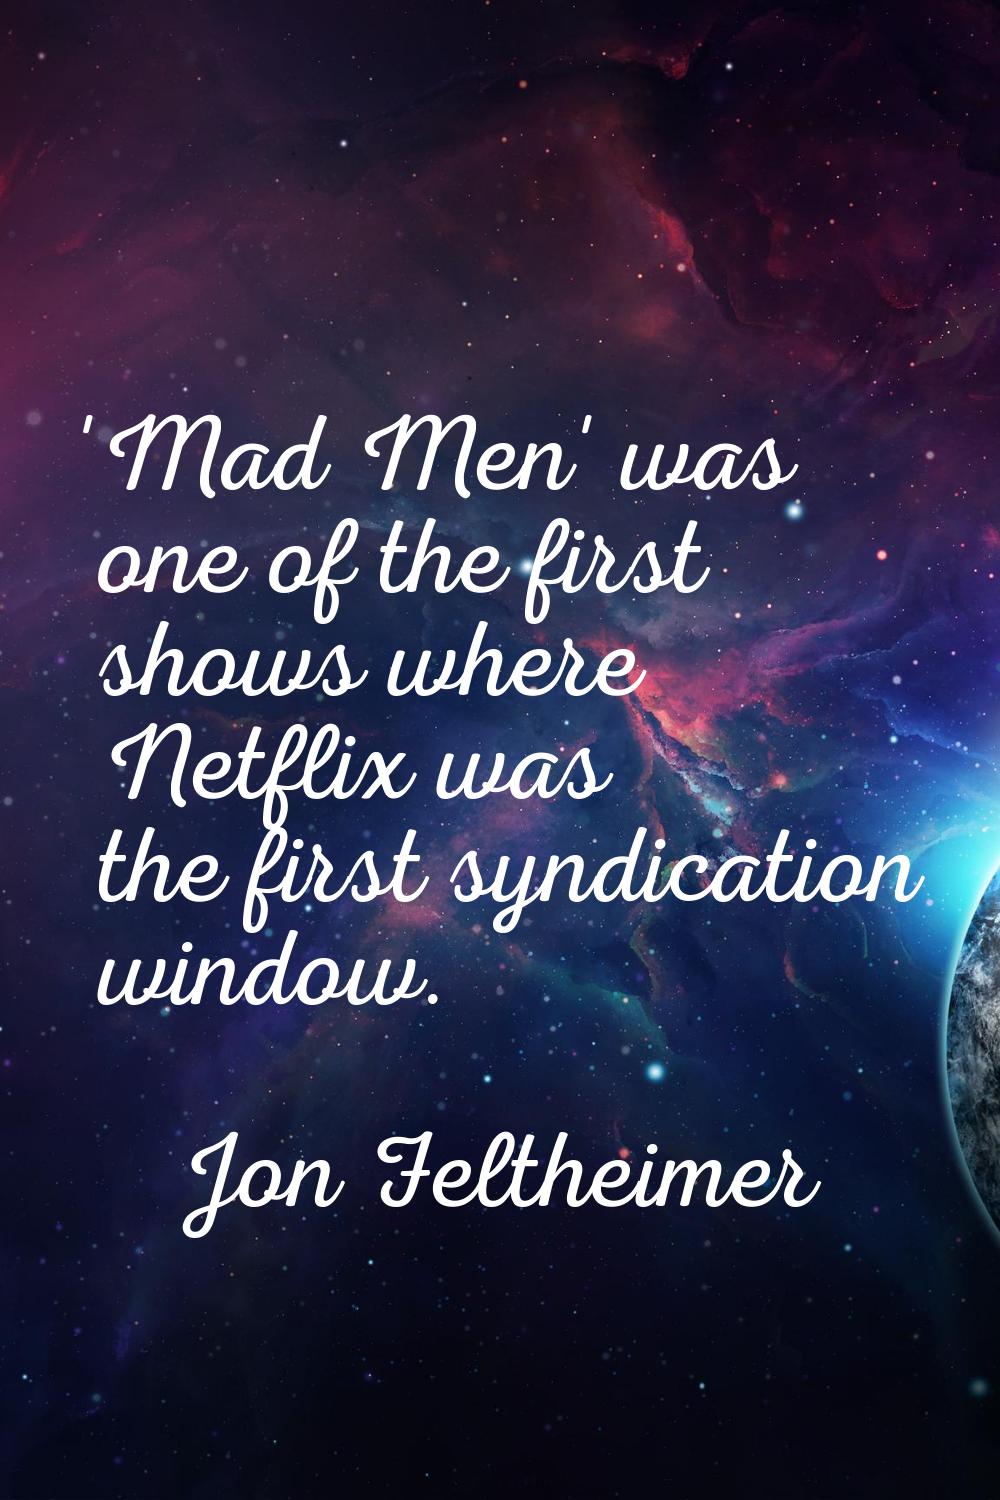 'Mad Men' was one of the first shows where Netflix was the first syndication window.